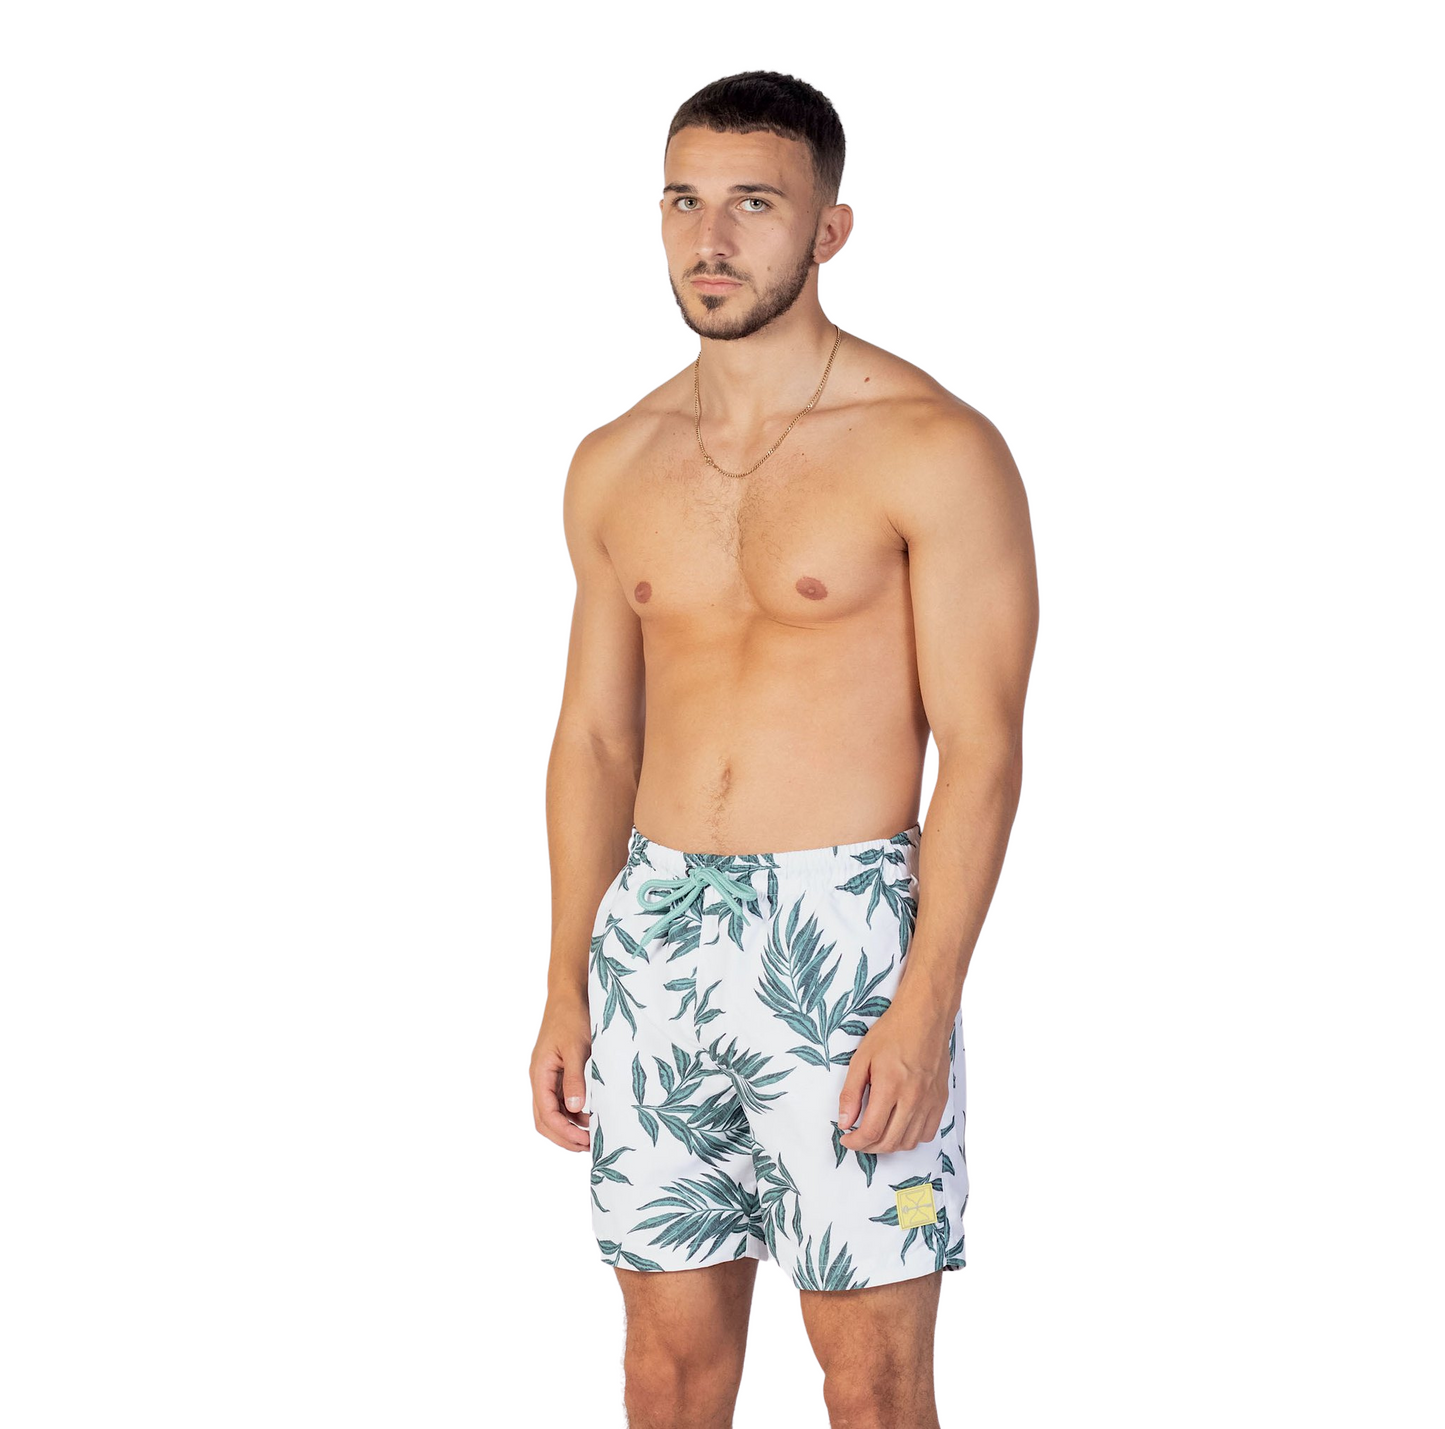 Teal/Floral Swim Shorts - Hourglass (Yellow Badge)